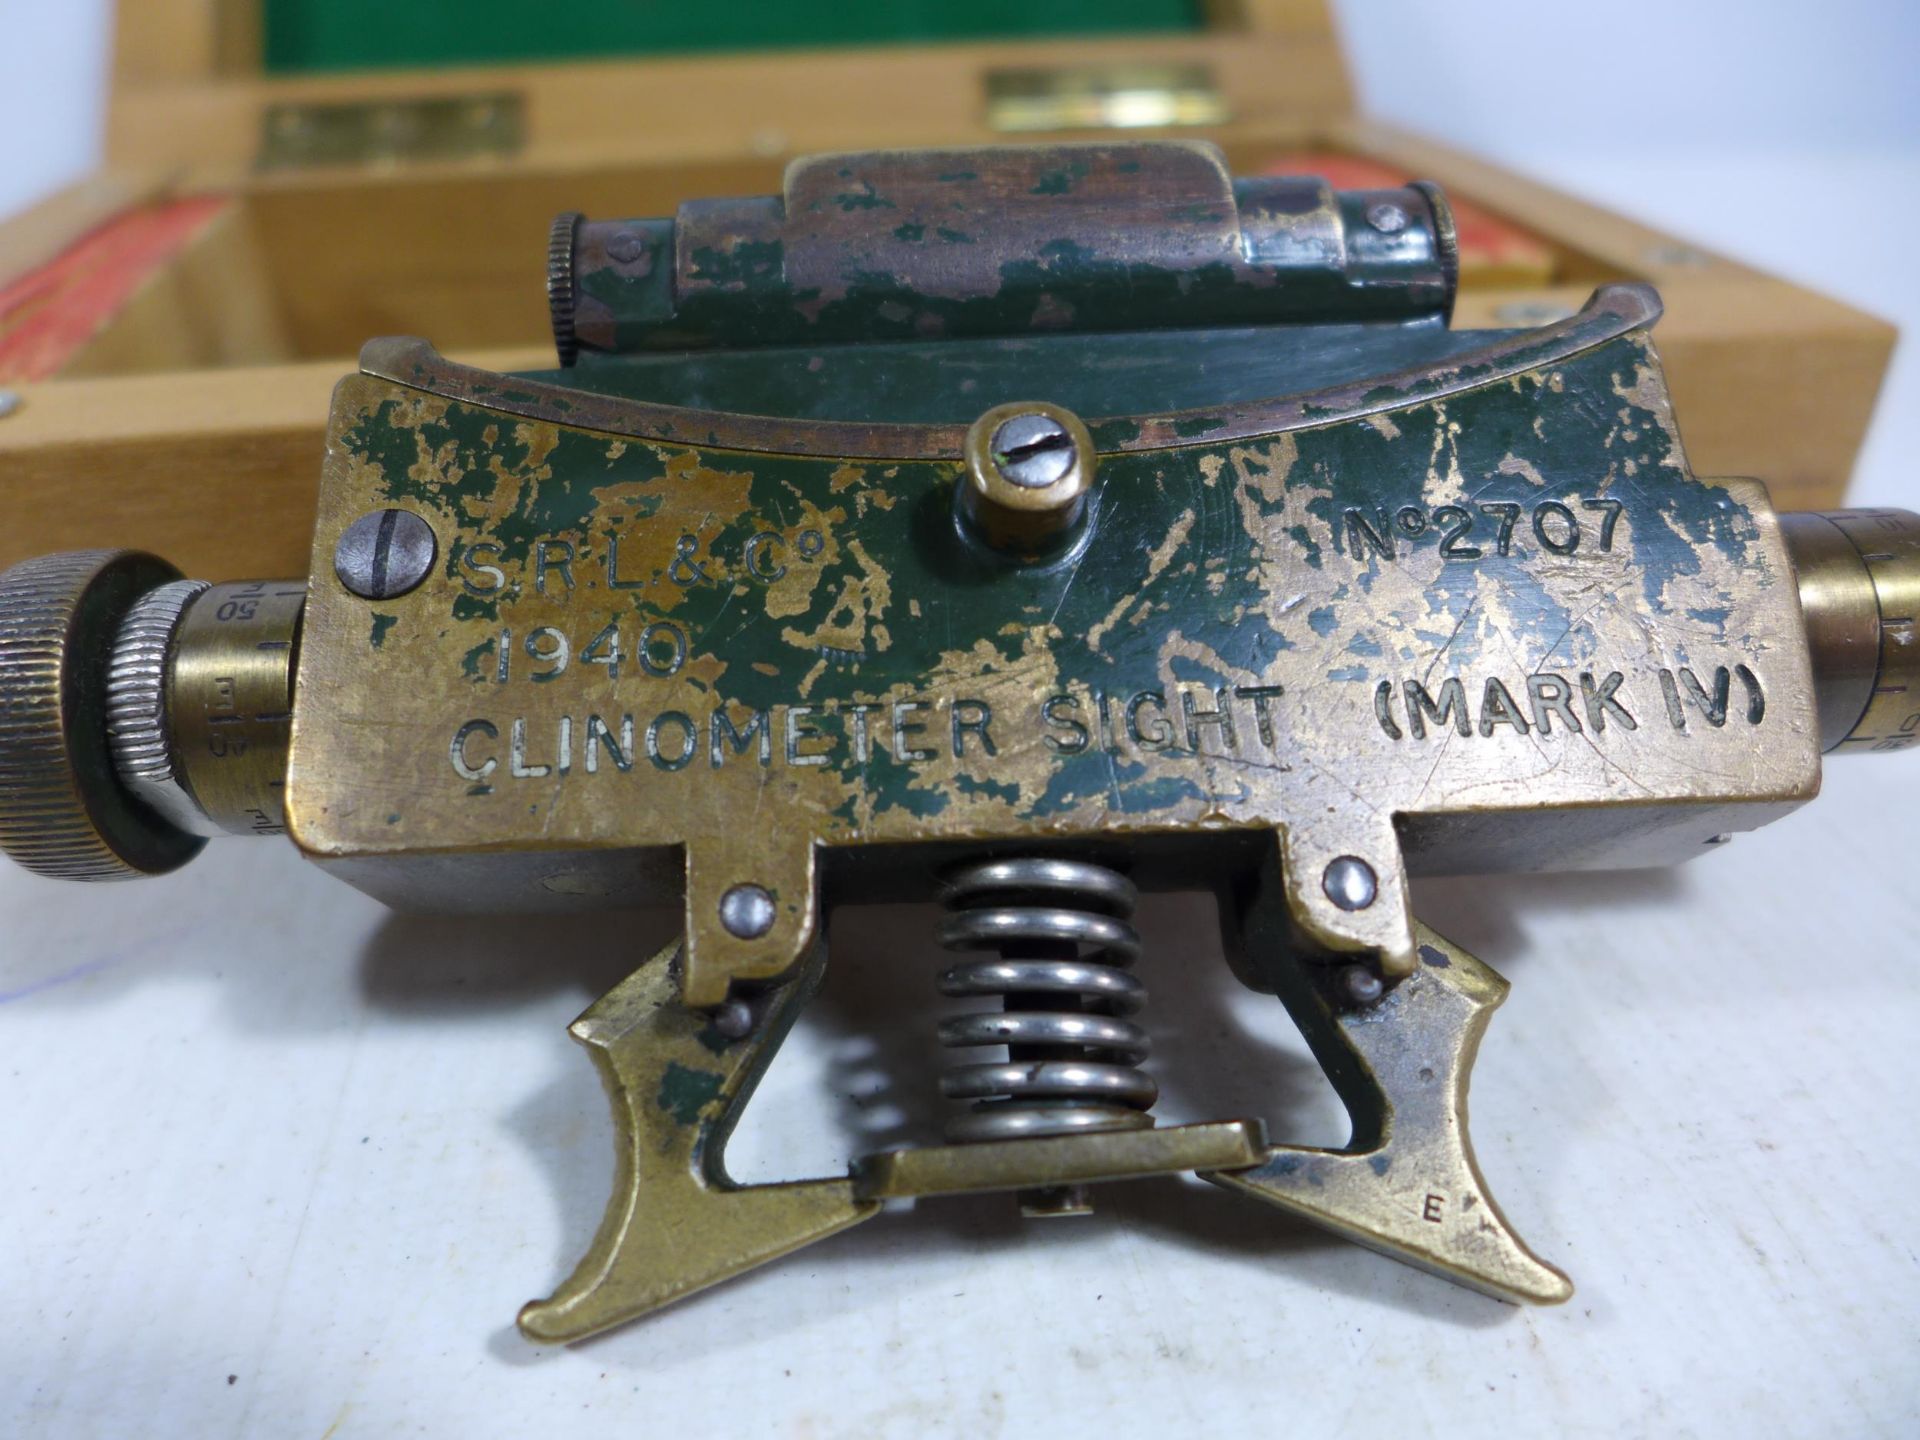 A CASED WORLD WAR II CLINOMETER SIGHT (MARK IV), DATED 1940 - Image 2 of 4